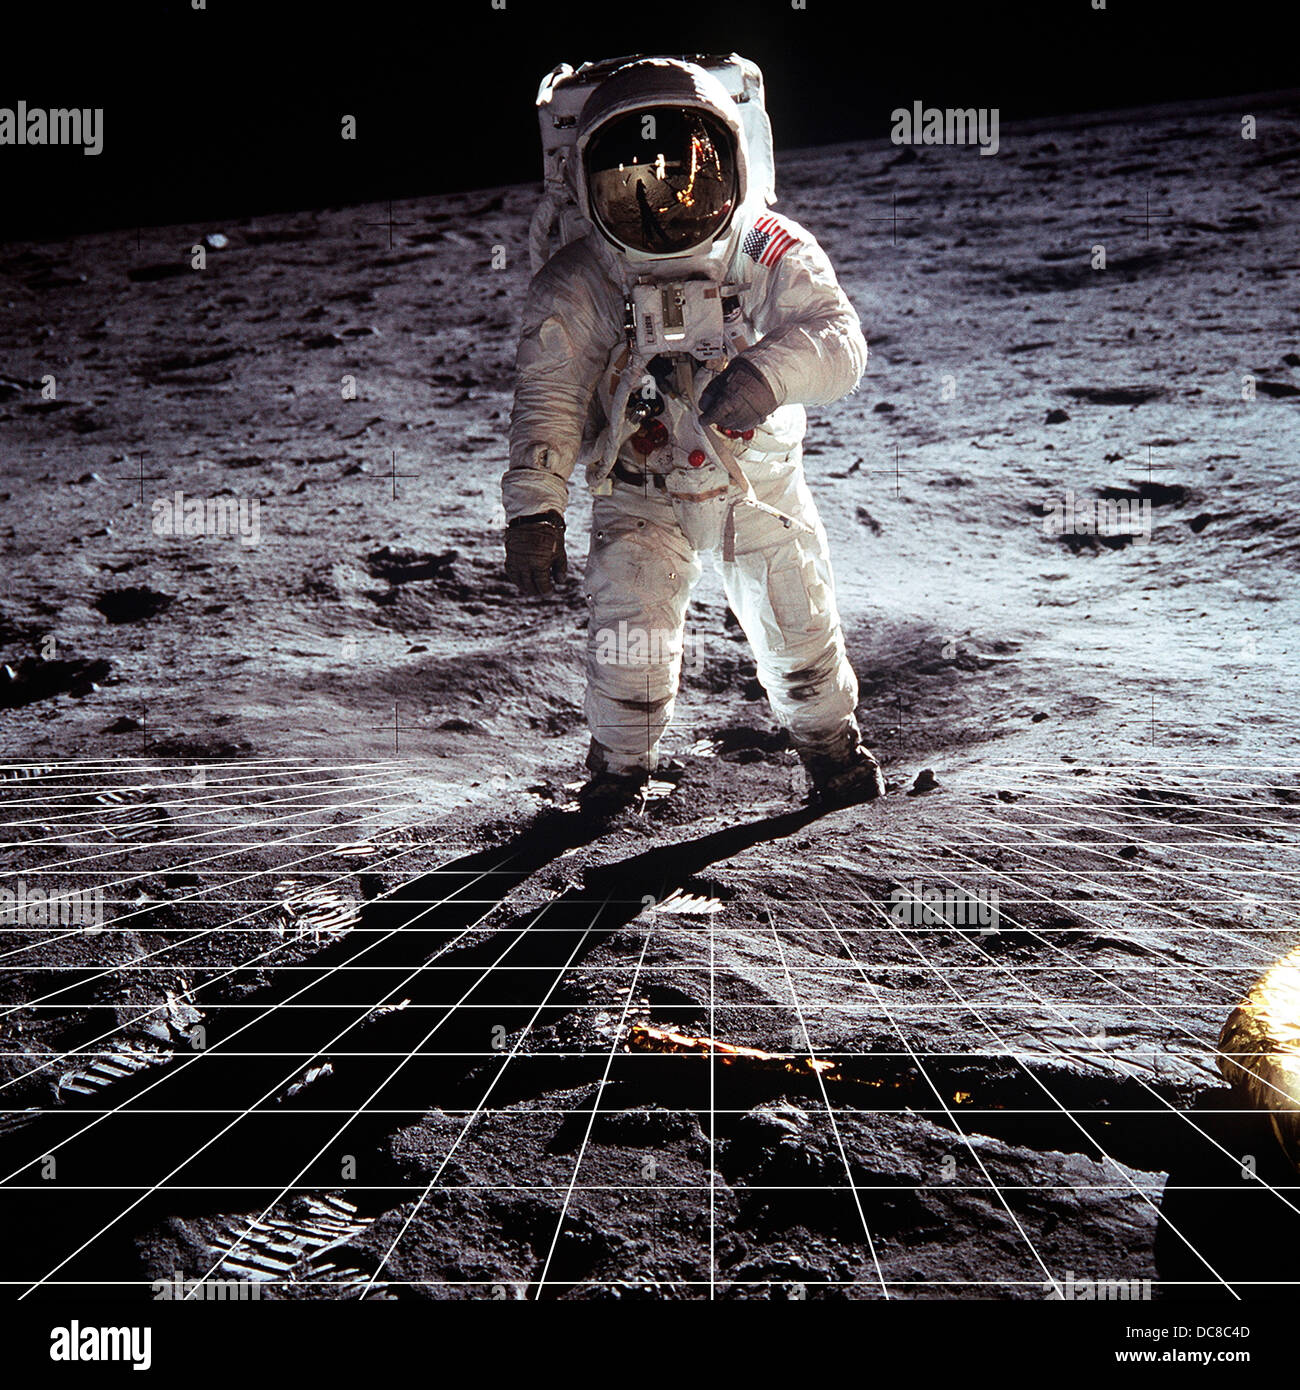 NASA astronaut standing on moon with perspective grid Stock Photo